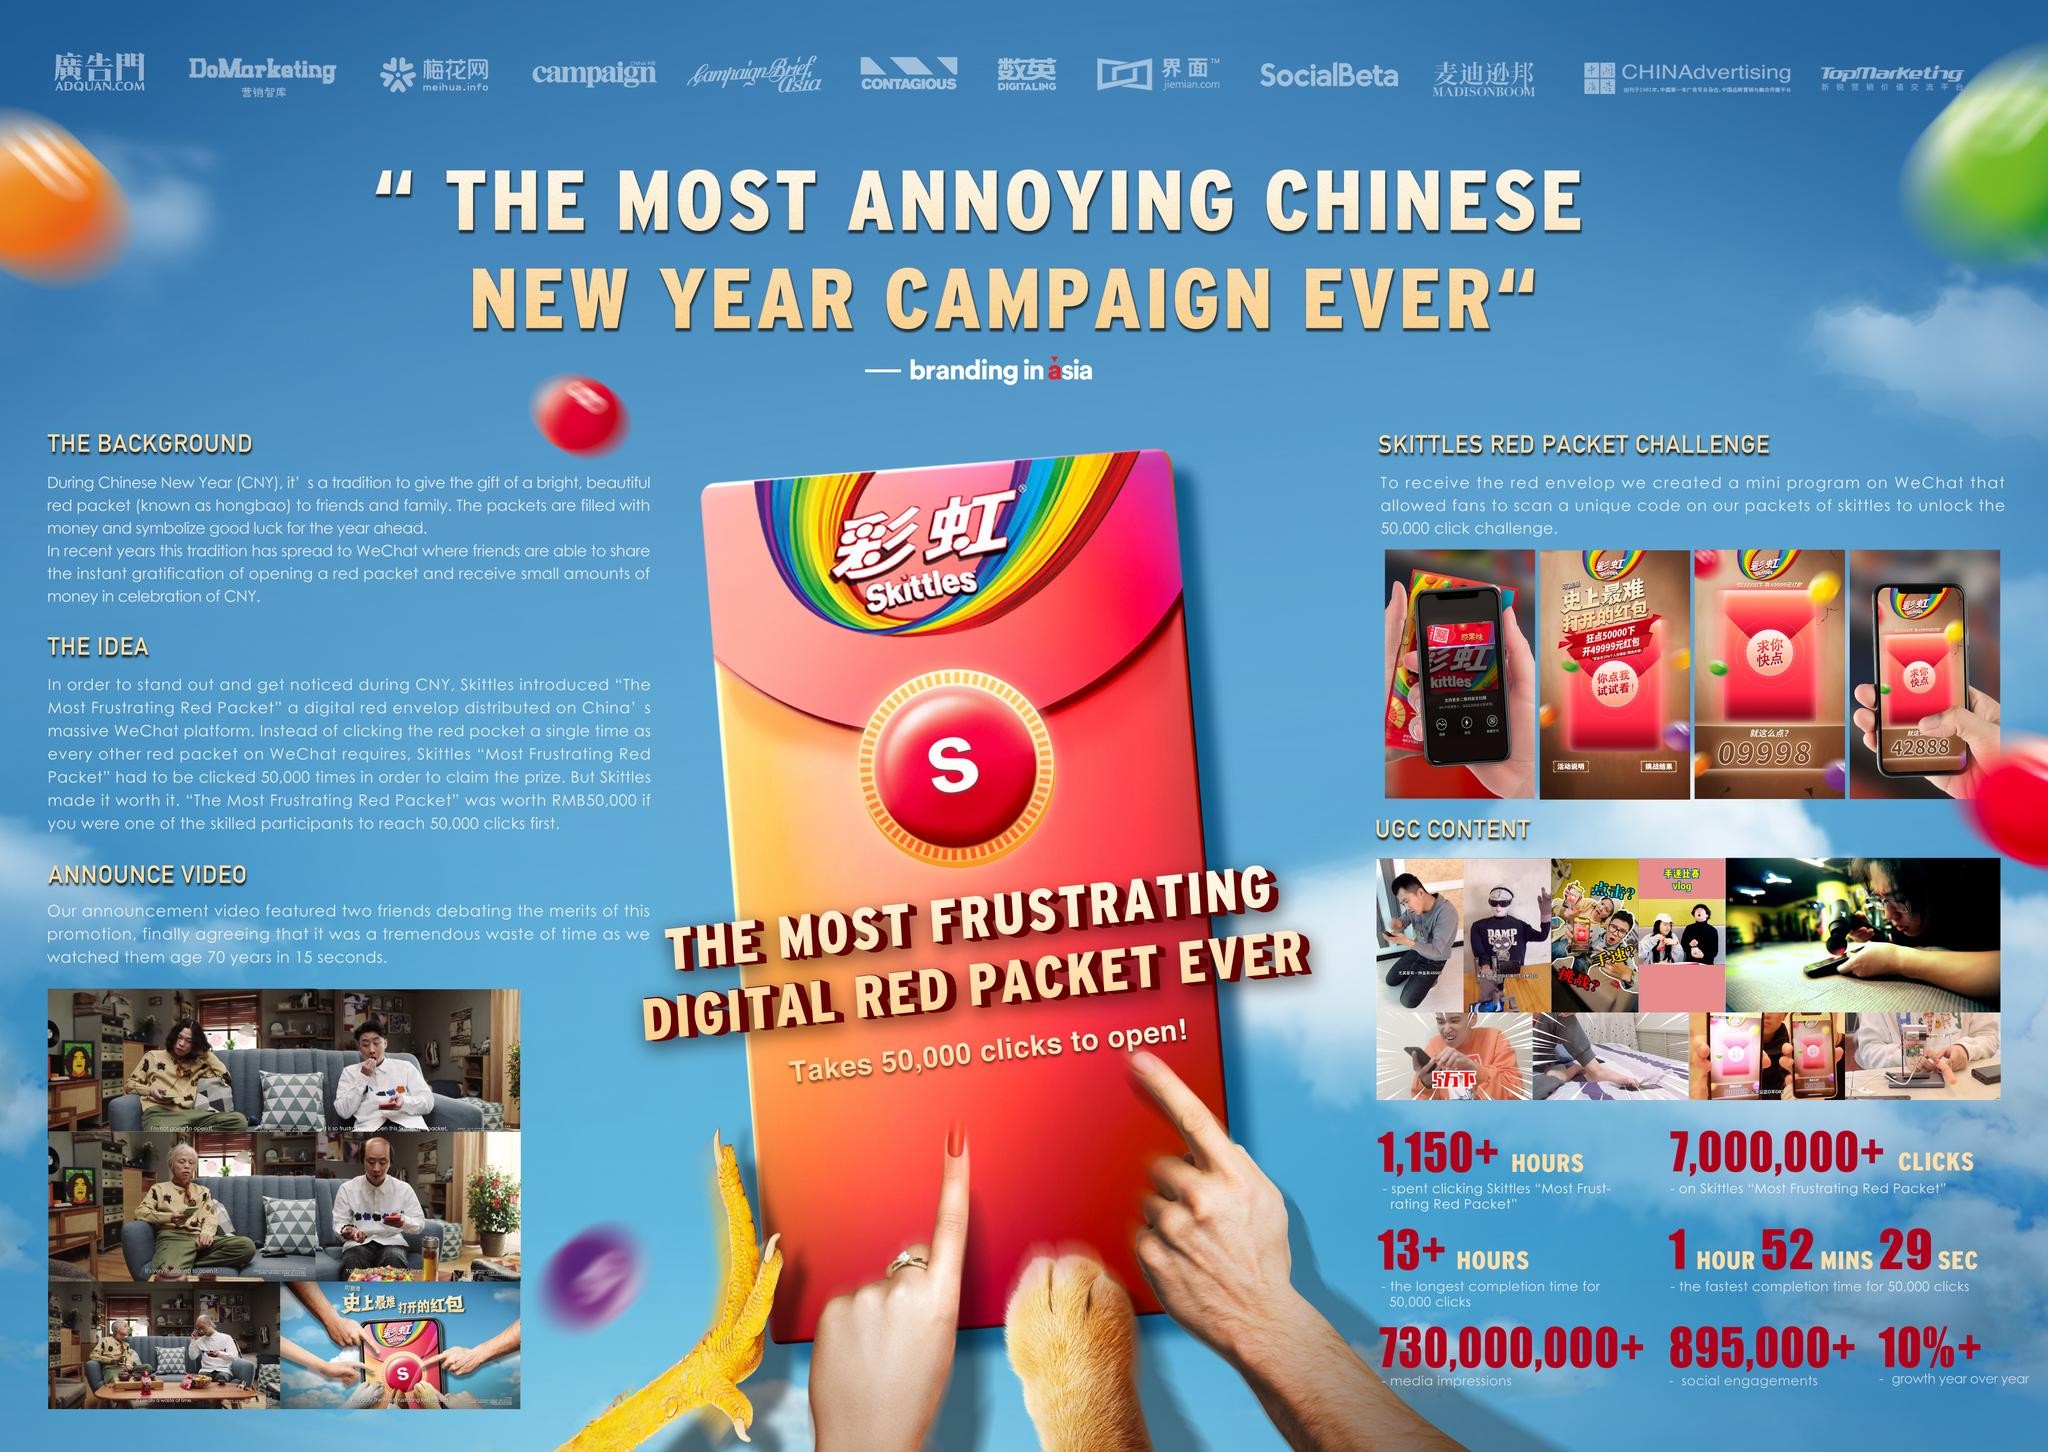 The Most Annoying Chinese New Year Campaign